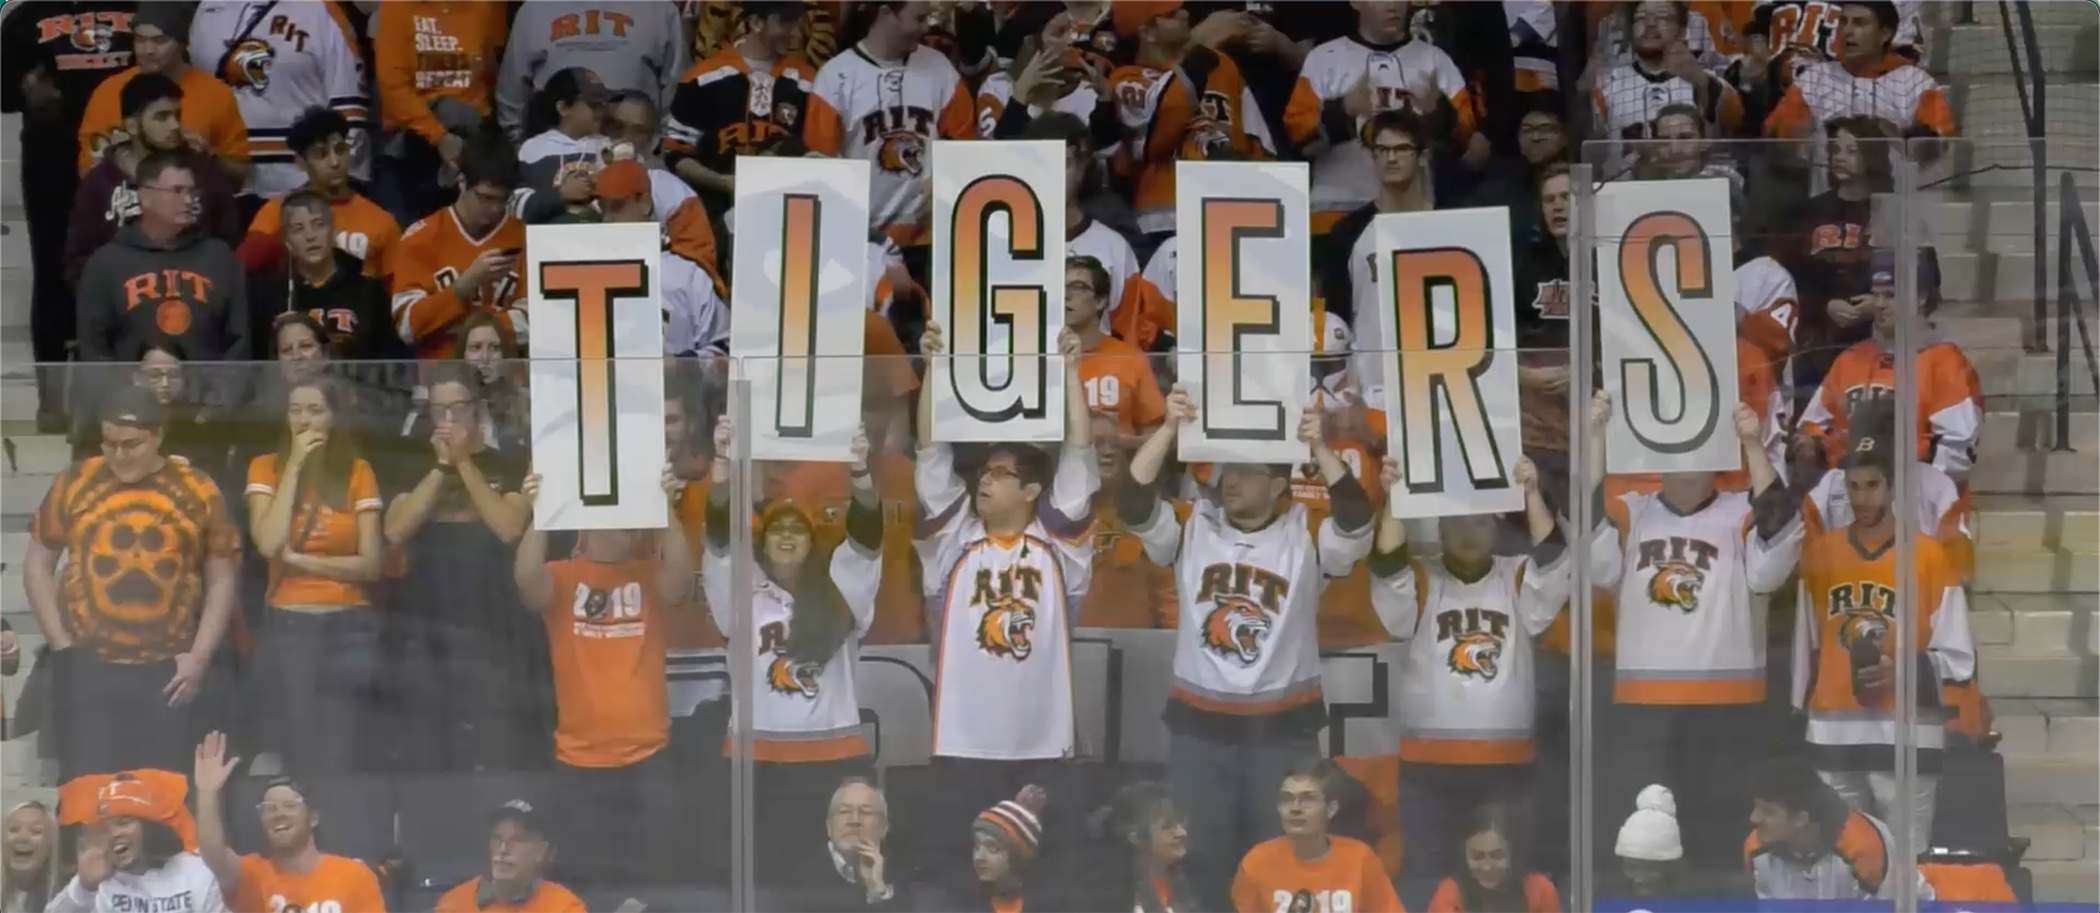 Students at RIT hockey game holding up letters that spell TIGERS